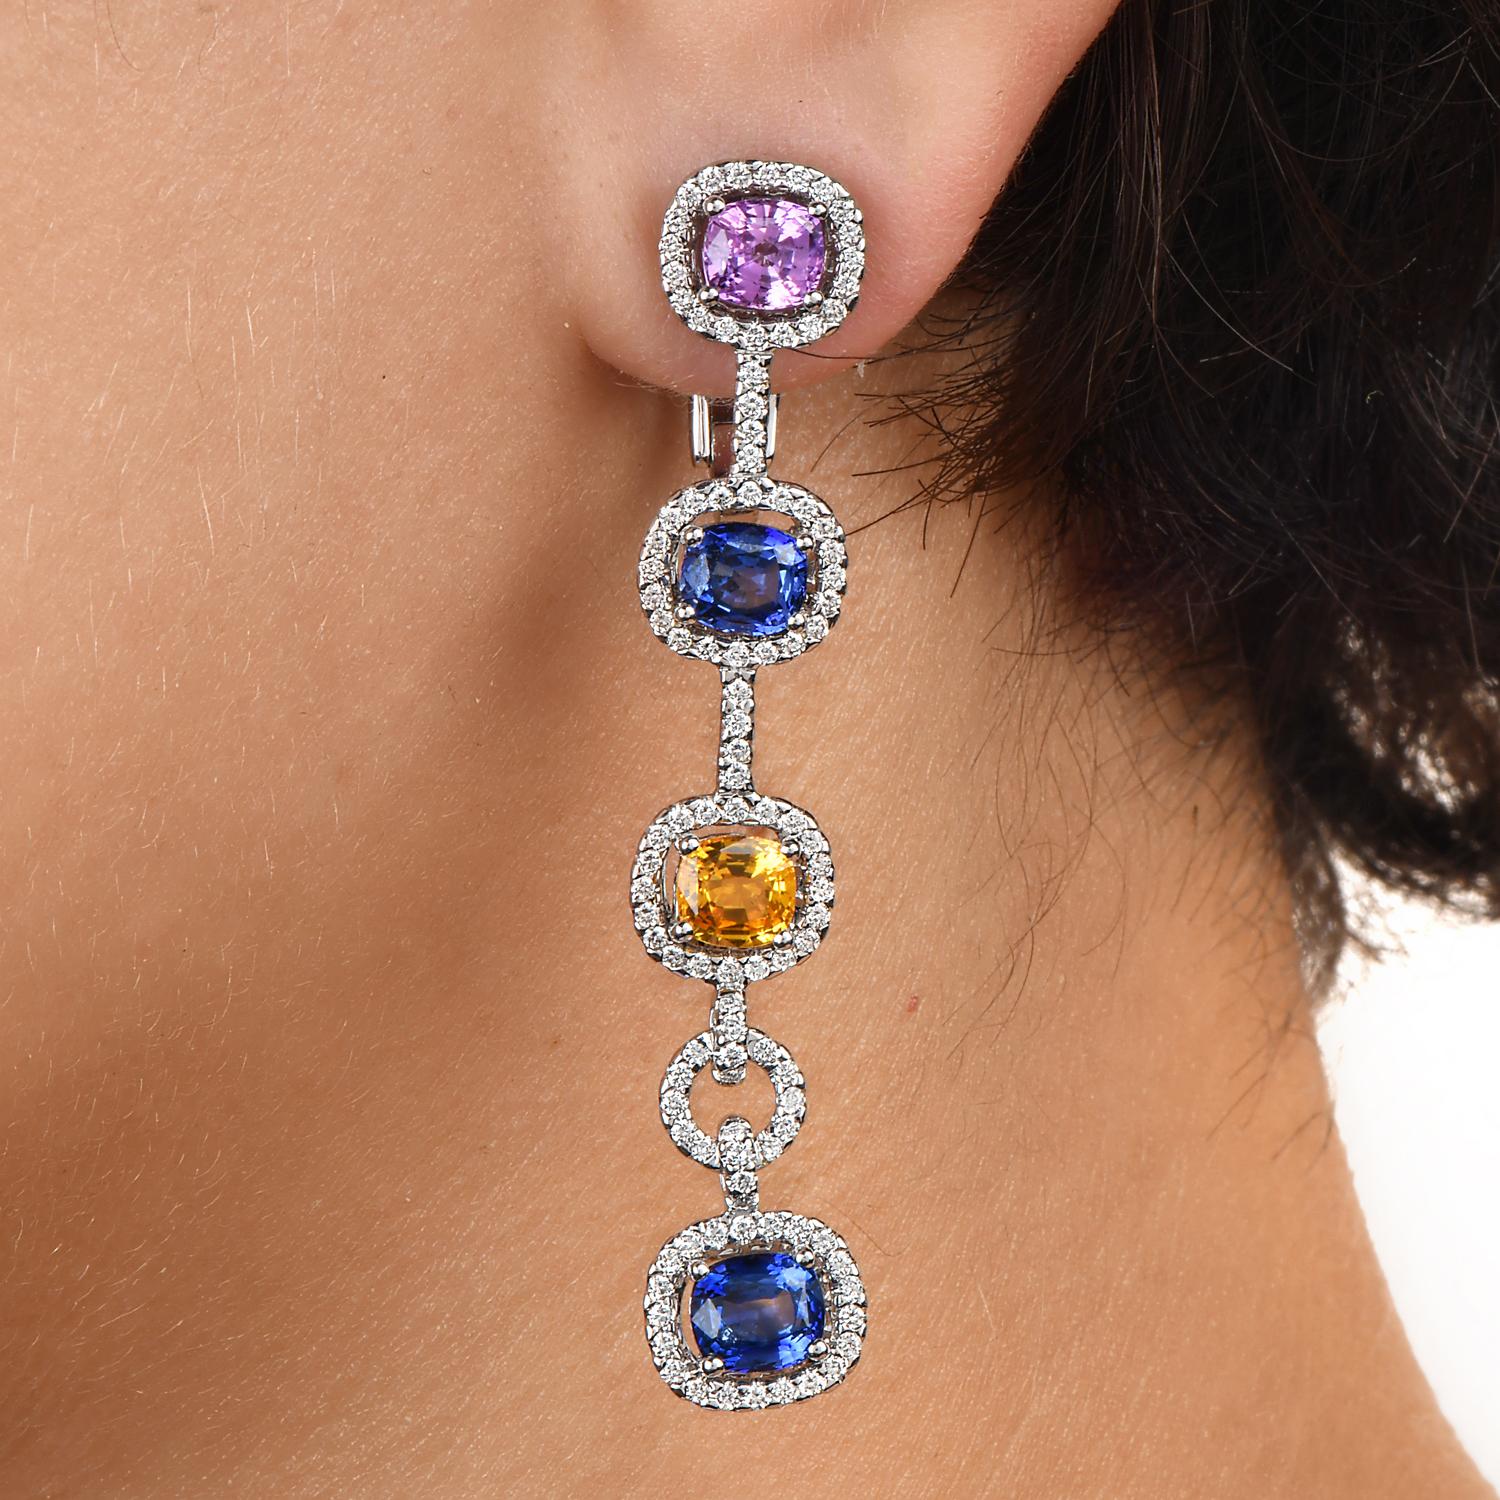 These Colorful Halo Diamond, Blue, yellow, and Pink Sapphires made in 18K Gold Link Dangle Earrings, are a stunning combination of vibrant gemstones and exquisite craftsmanship.

These earrings are a true reflection of contemporary elegance and